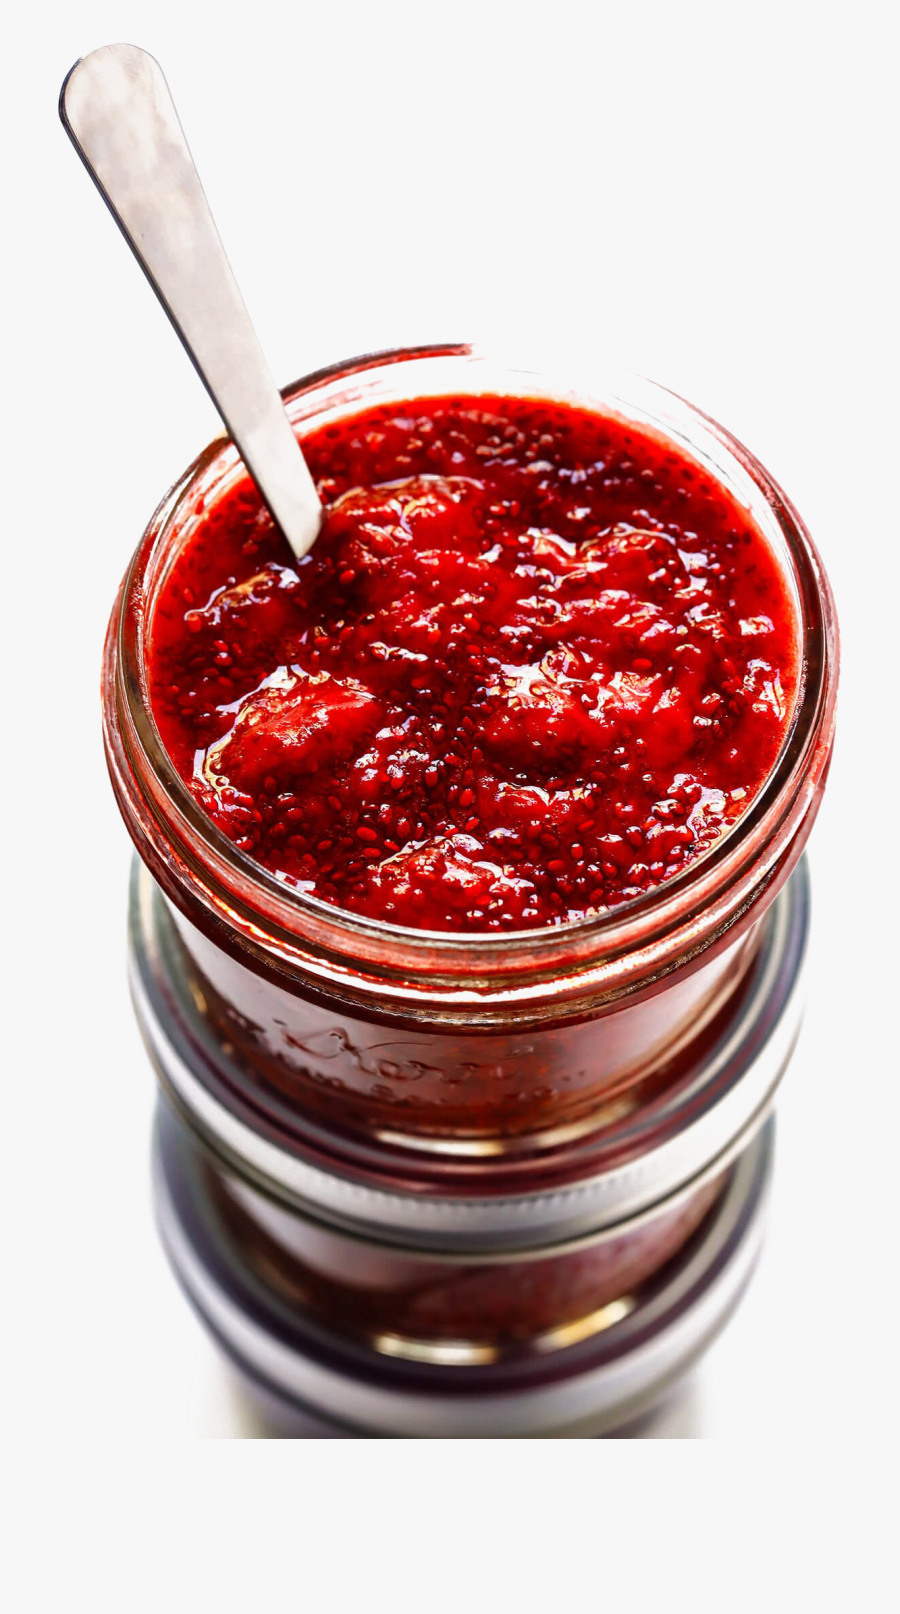 Jam Png Clipart - Chia Seed Jam, Transparent Clipart